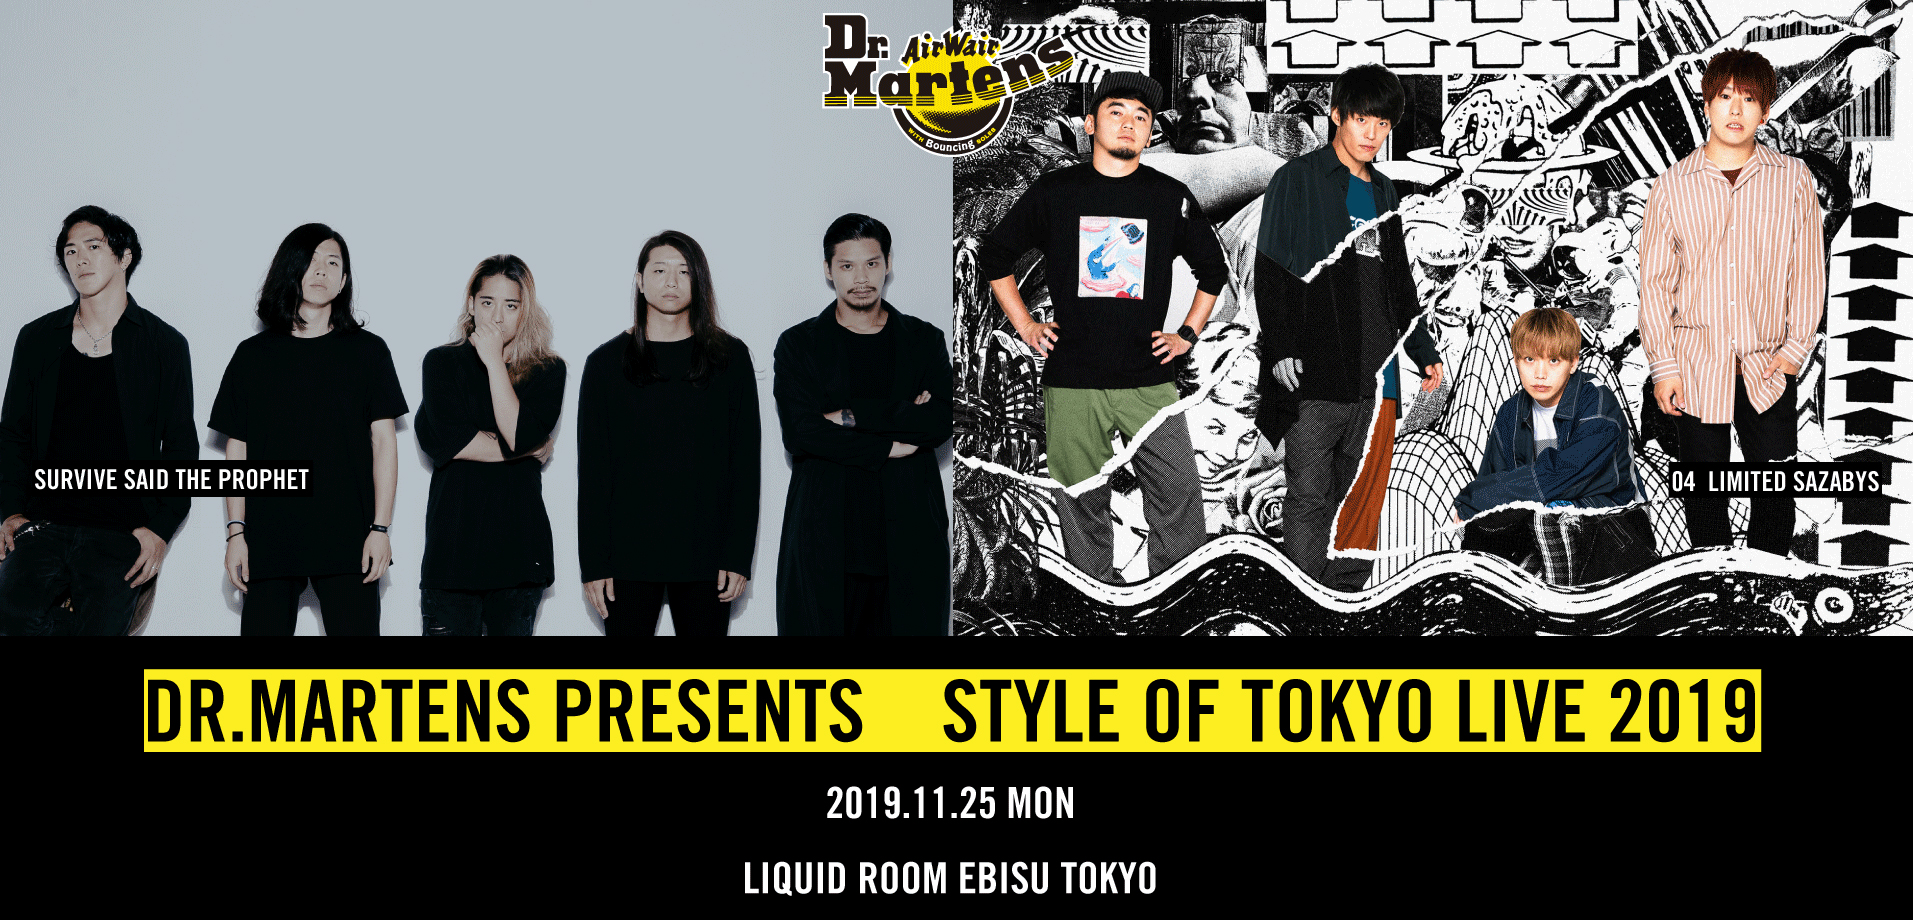 "DR.MARTENS presents STYLE of TOKYO LIVE 2019" 出演決定！